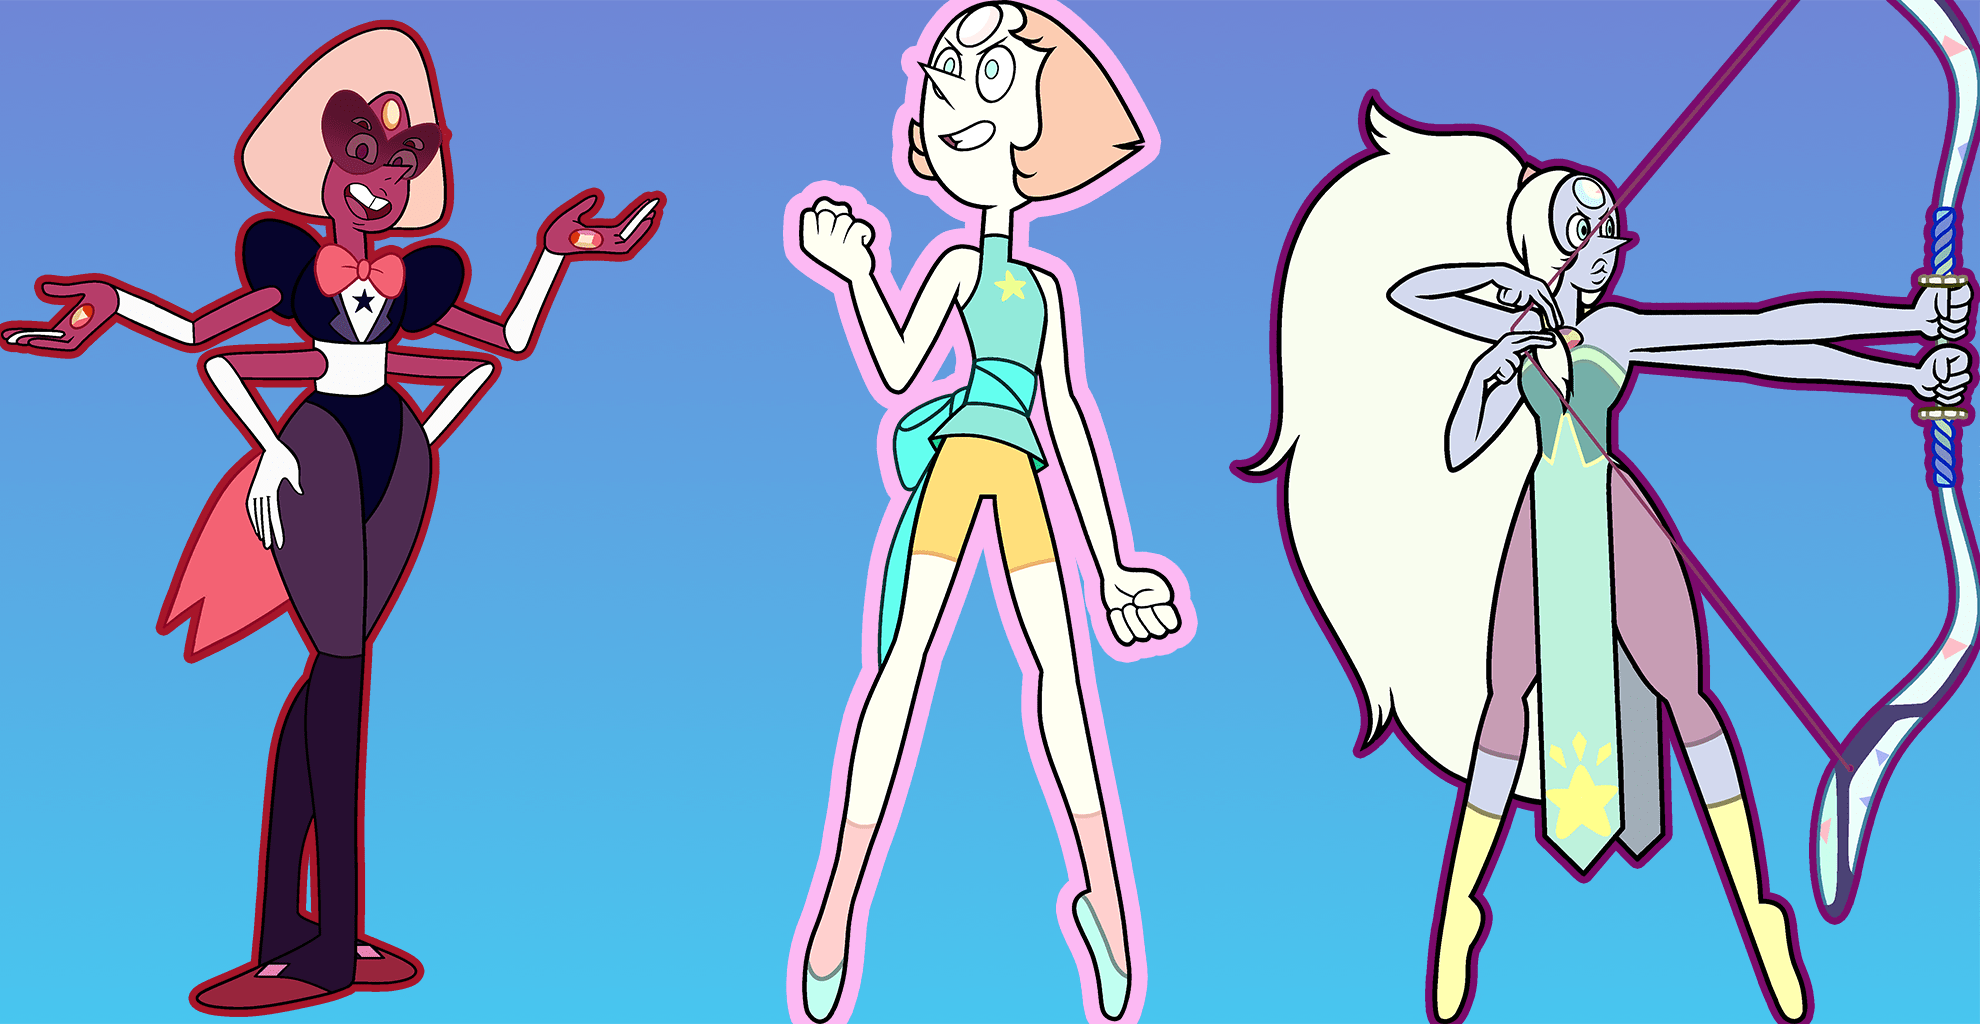 Pearl Steven Universe Wallpapers Top Free Pearl Steven Universe Backgrounds Wallpaperaccess 